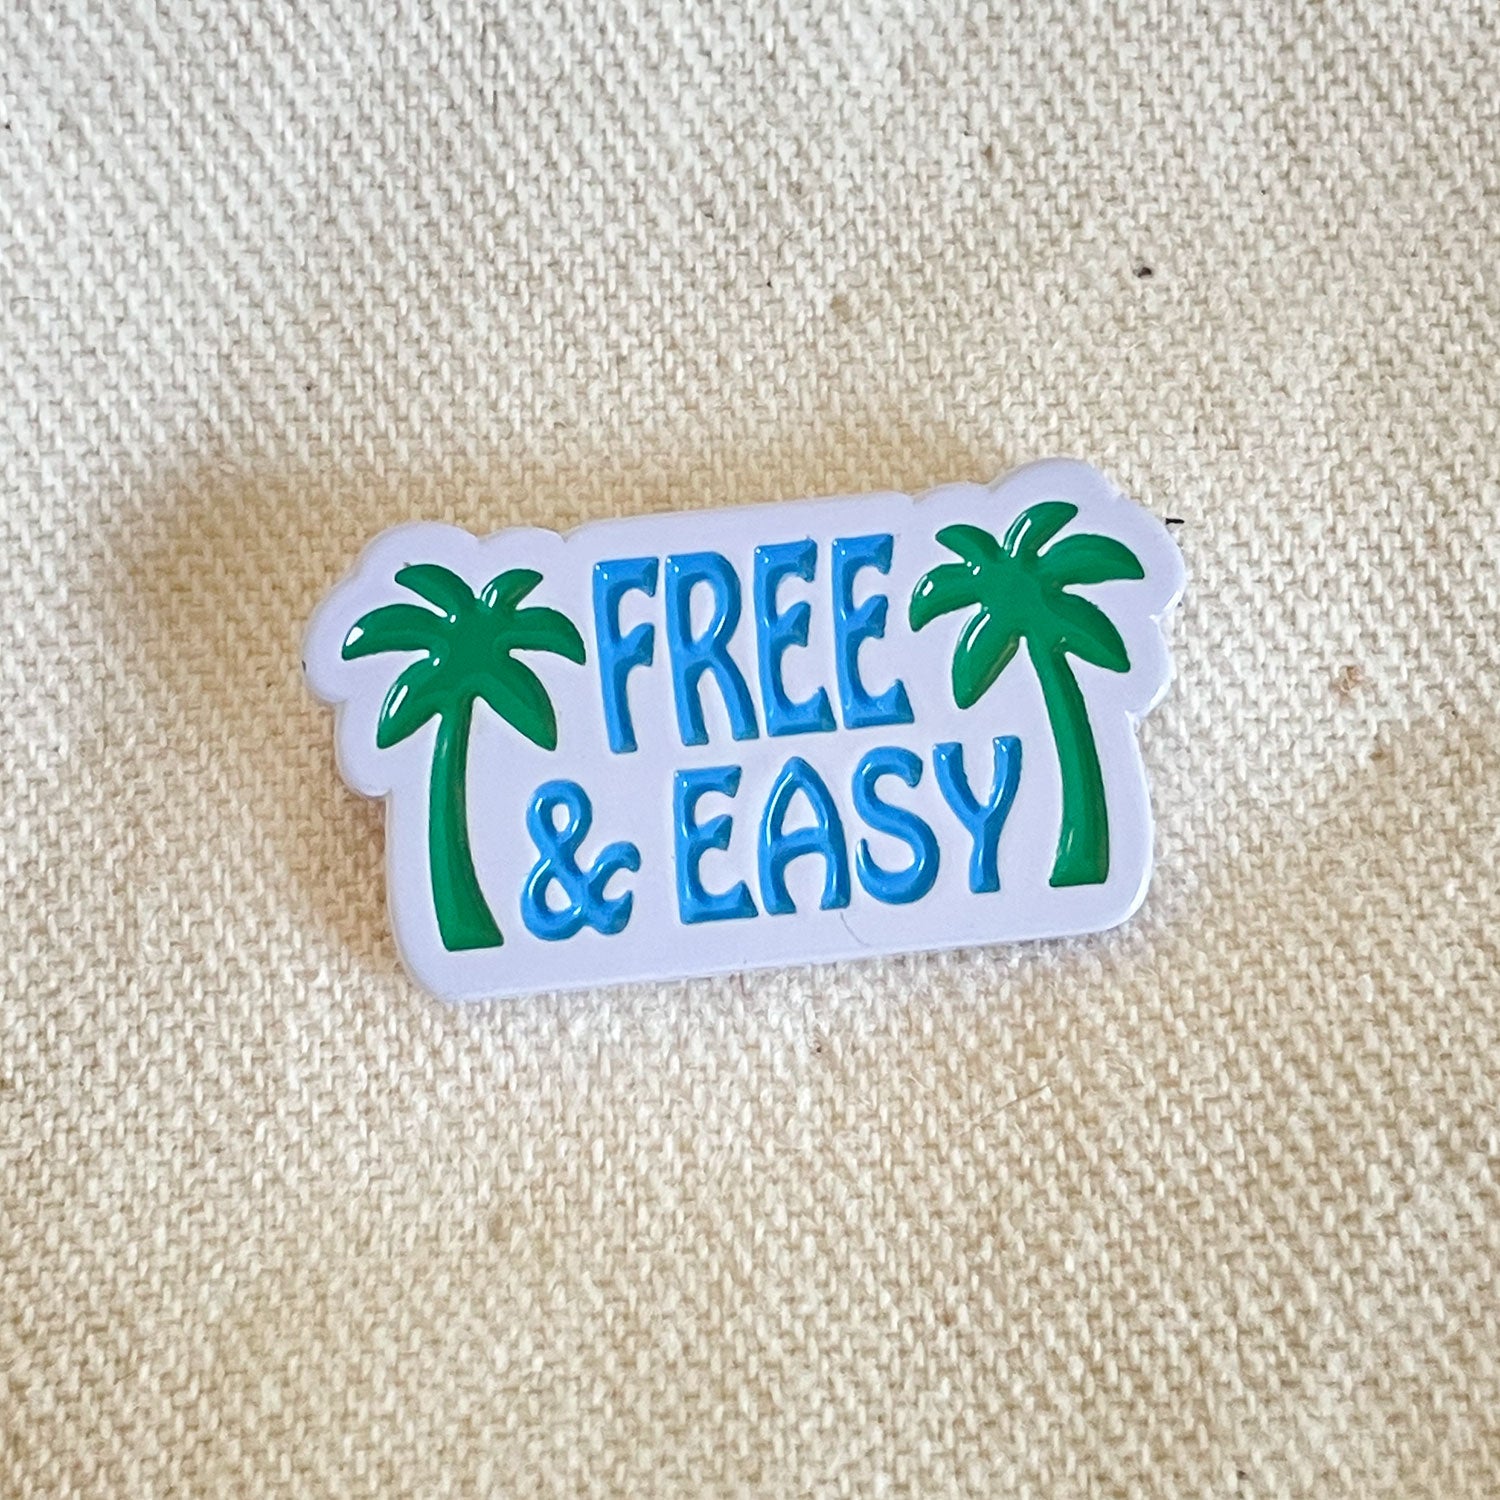 Palm Trees Enamel Pin in blue, green, and white on a white background -Free & Easy